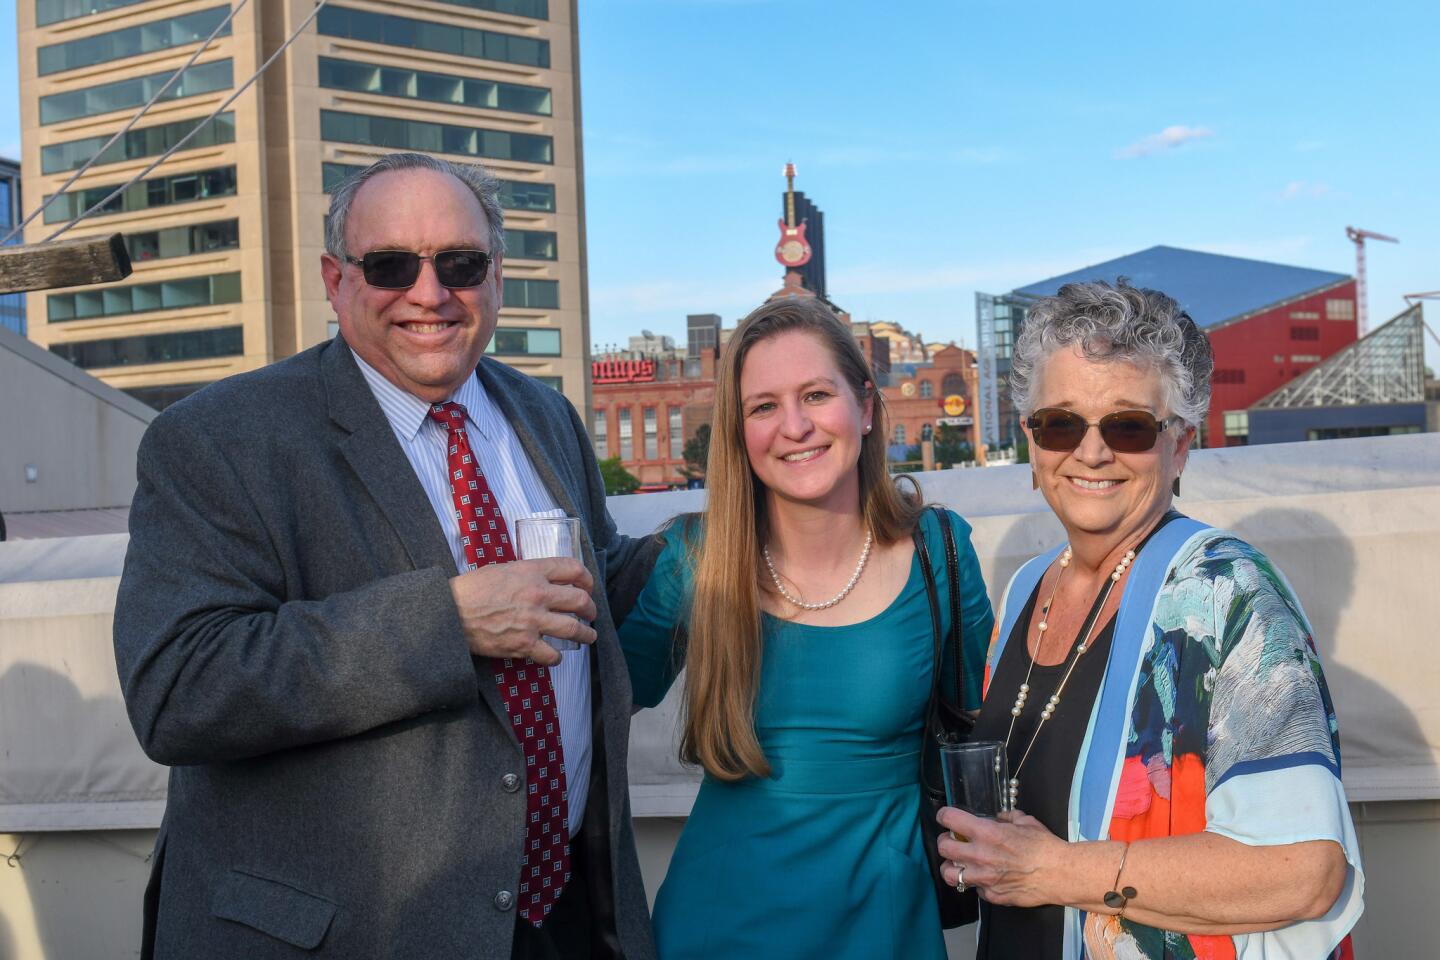 Dave Greenwood, Susie Peterson and Gayle Greenwood attended Historic Ships' Captain's Jubilee on board the USS Constellation.